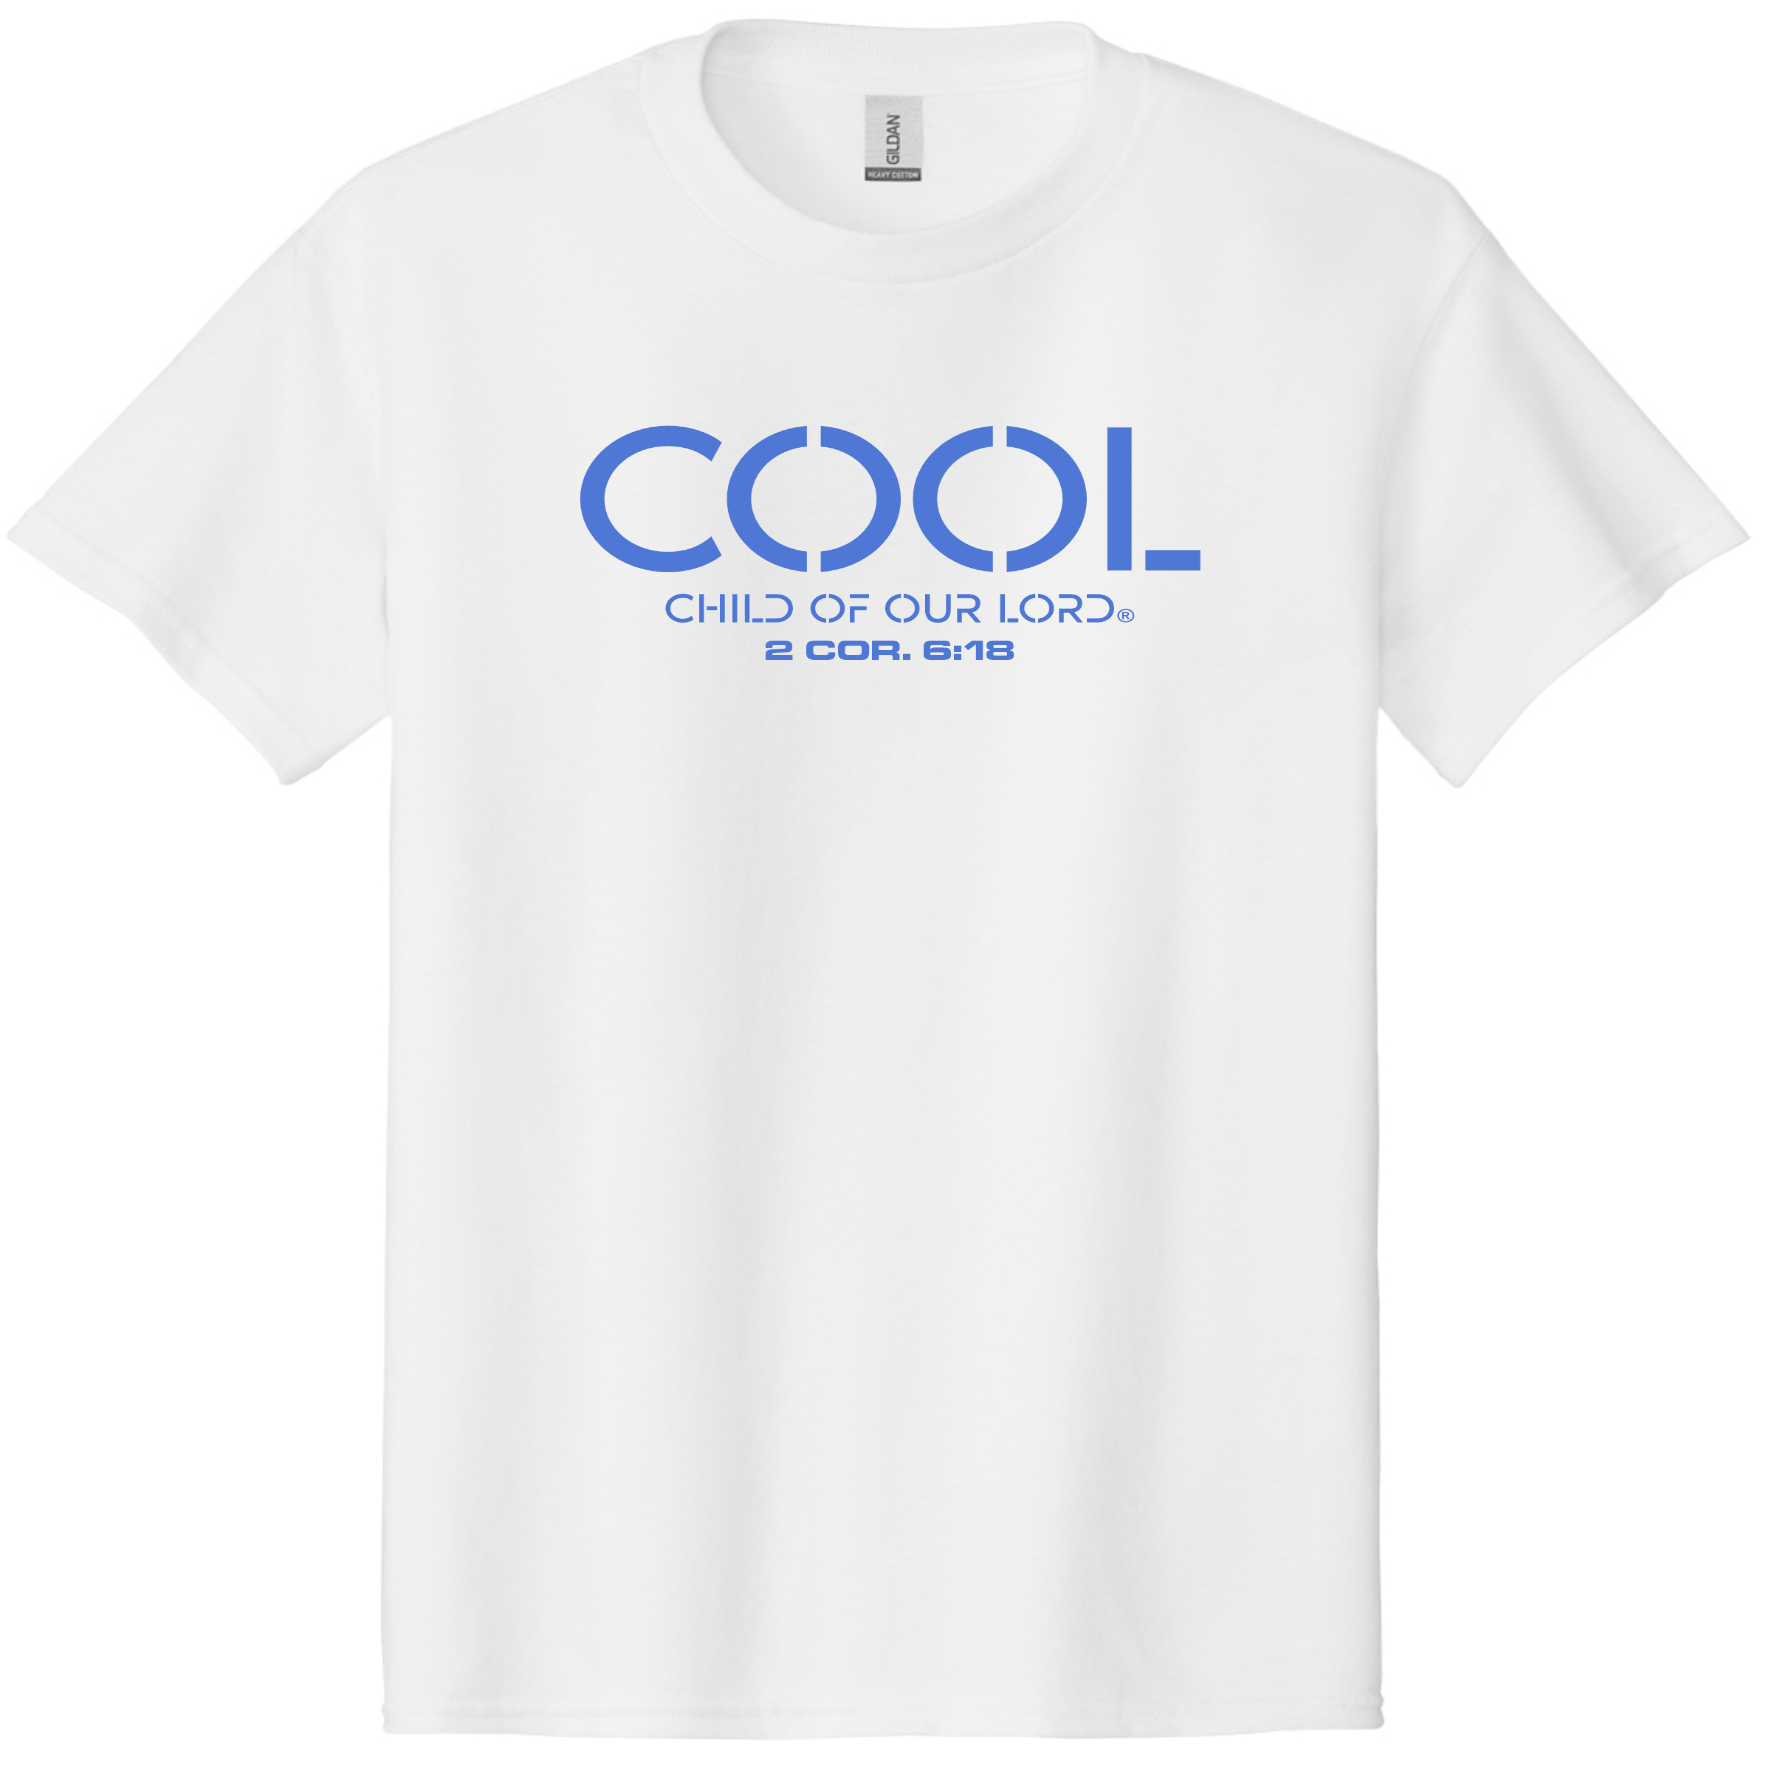 C.O.O.L® Child Of Our Lord!® Unisex T-Shirt Adult & Youth C.O.O.L®! T-Shirt - COATES Christian Apparel